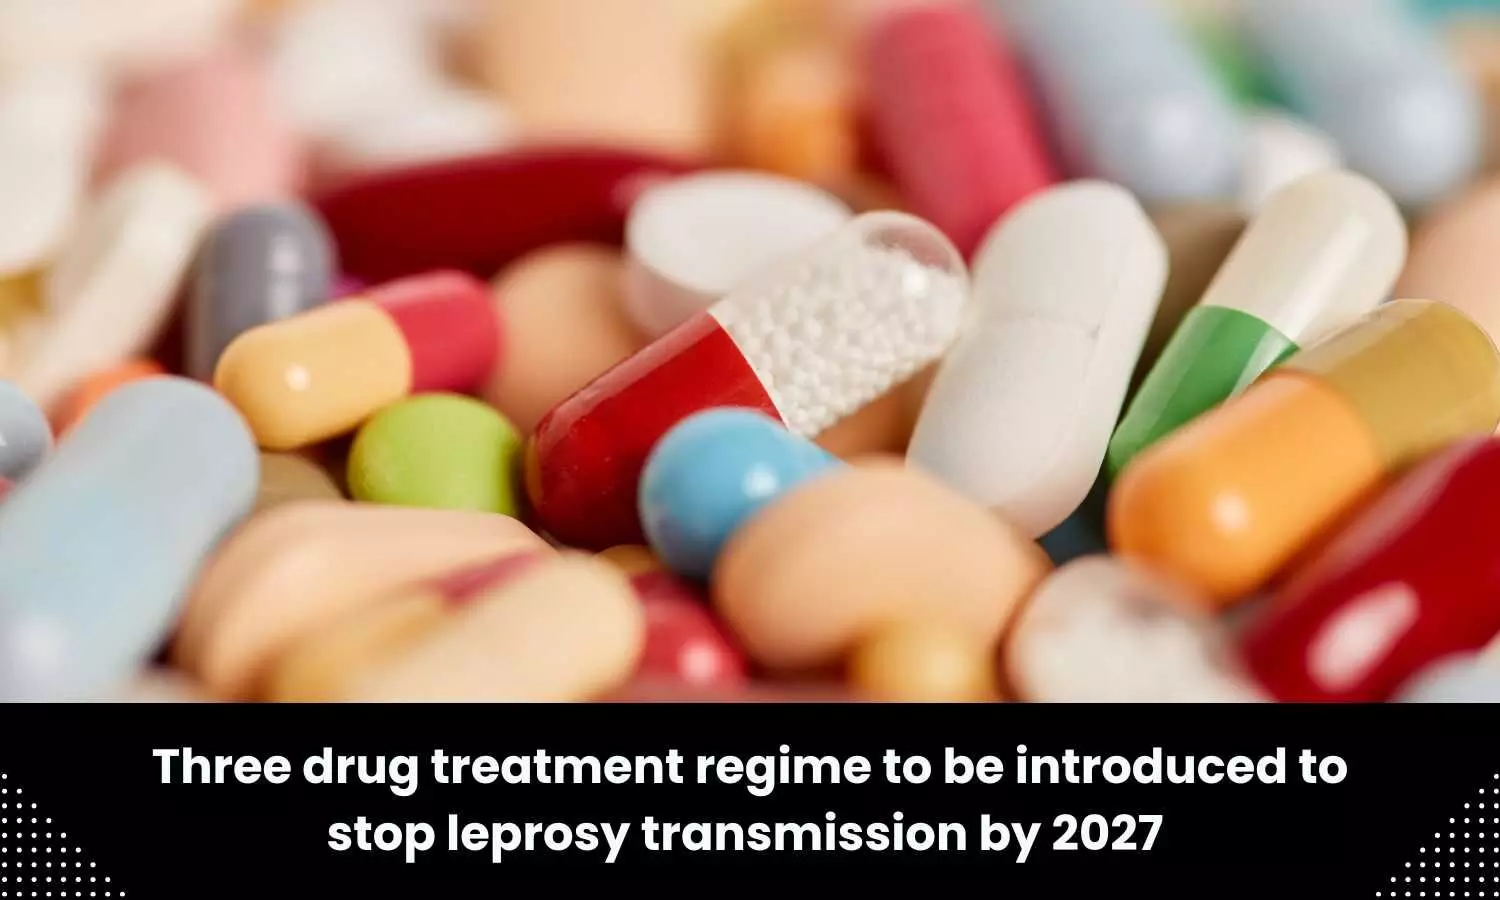 Health Ministry to introduce new three-drug regimen for leprosy